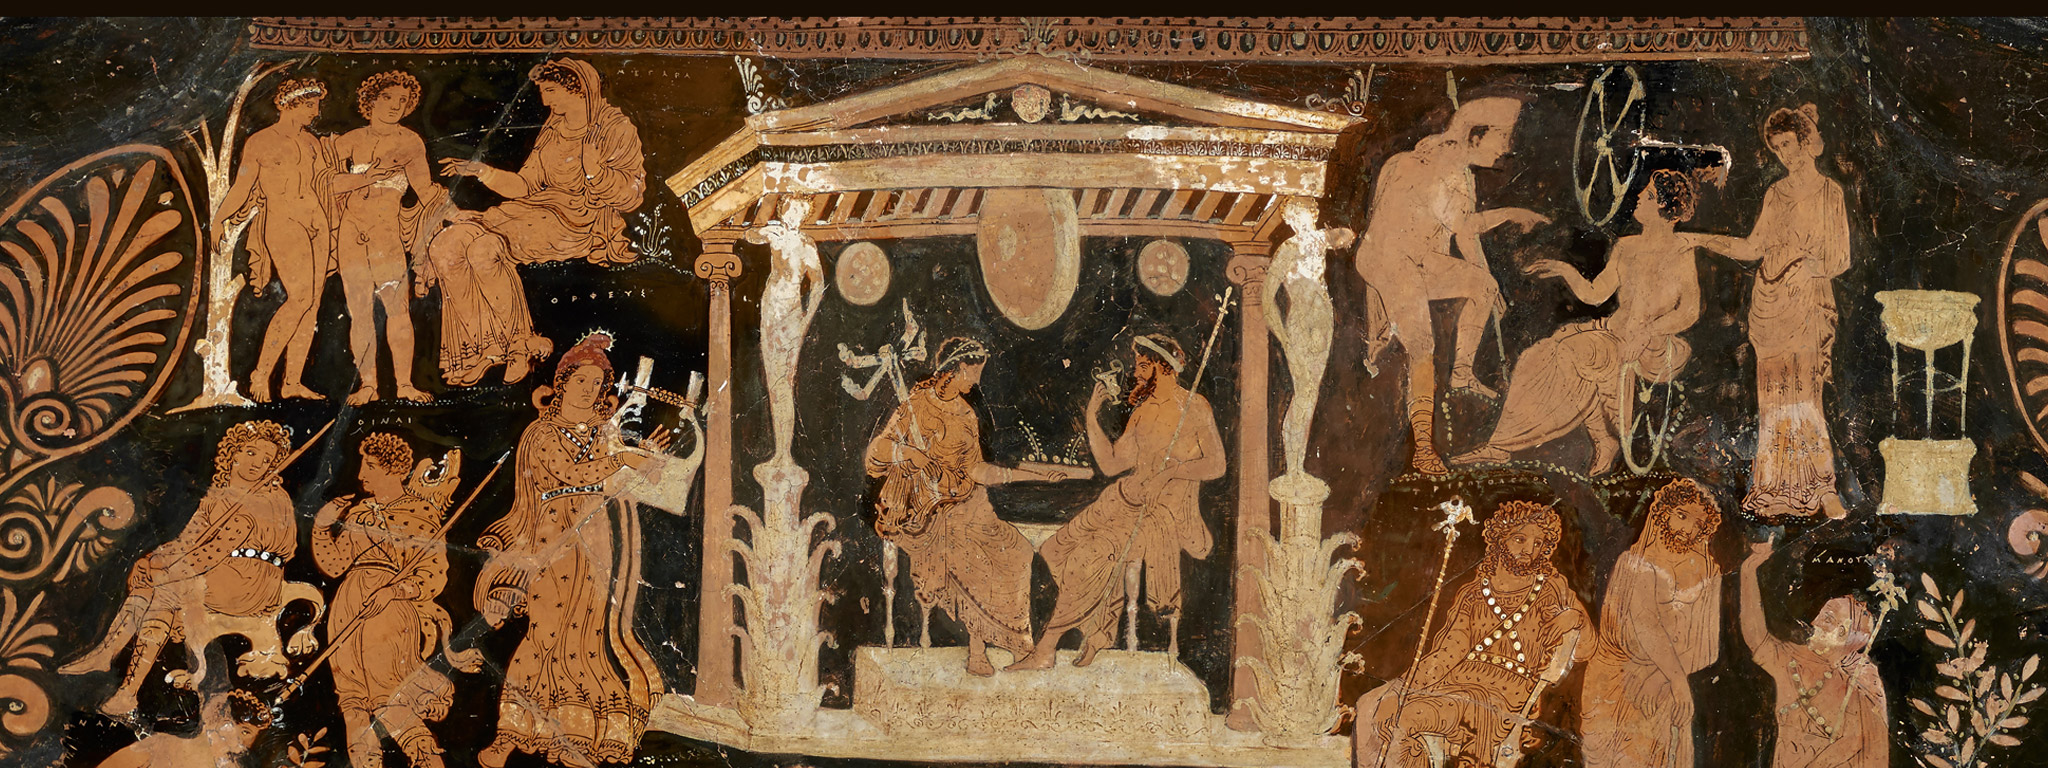 Funerary Vessel with an Underworld Scene (detail, pre-conservation), South Italian, made in Apulia, 360–340 BC; found in Altamura, Italy, in 1847, terracotta. Red-figure volute krater attributed to the Circle of the Lycurgus Painter. National Archaeological Museum of Naples, 81666